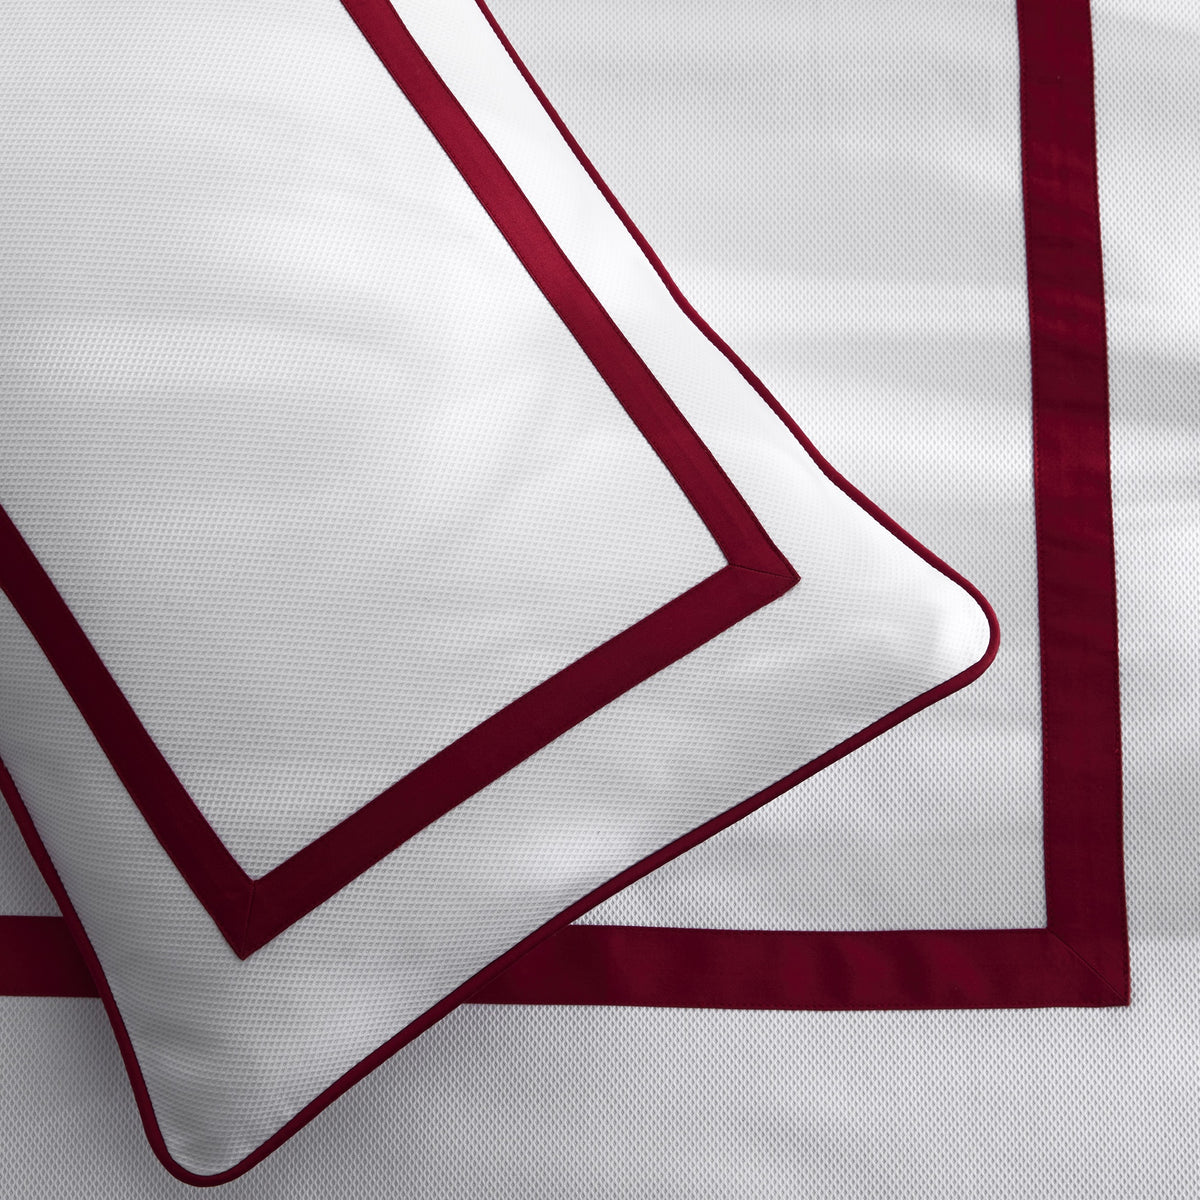 Close Up Shot of Matouk Louise Pique Bedding in Scarlet Color